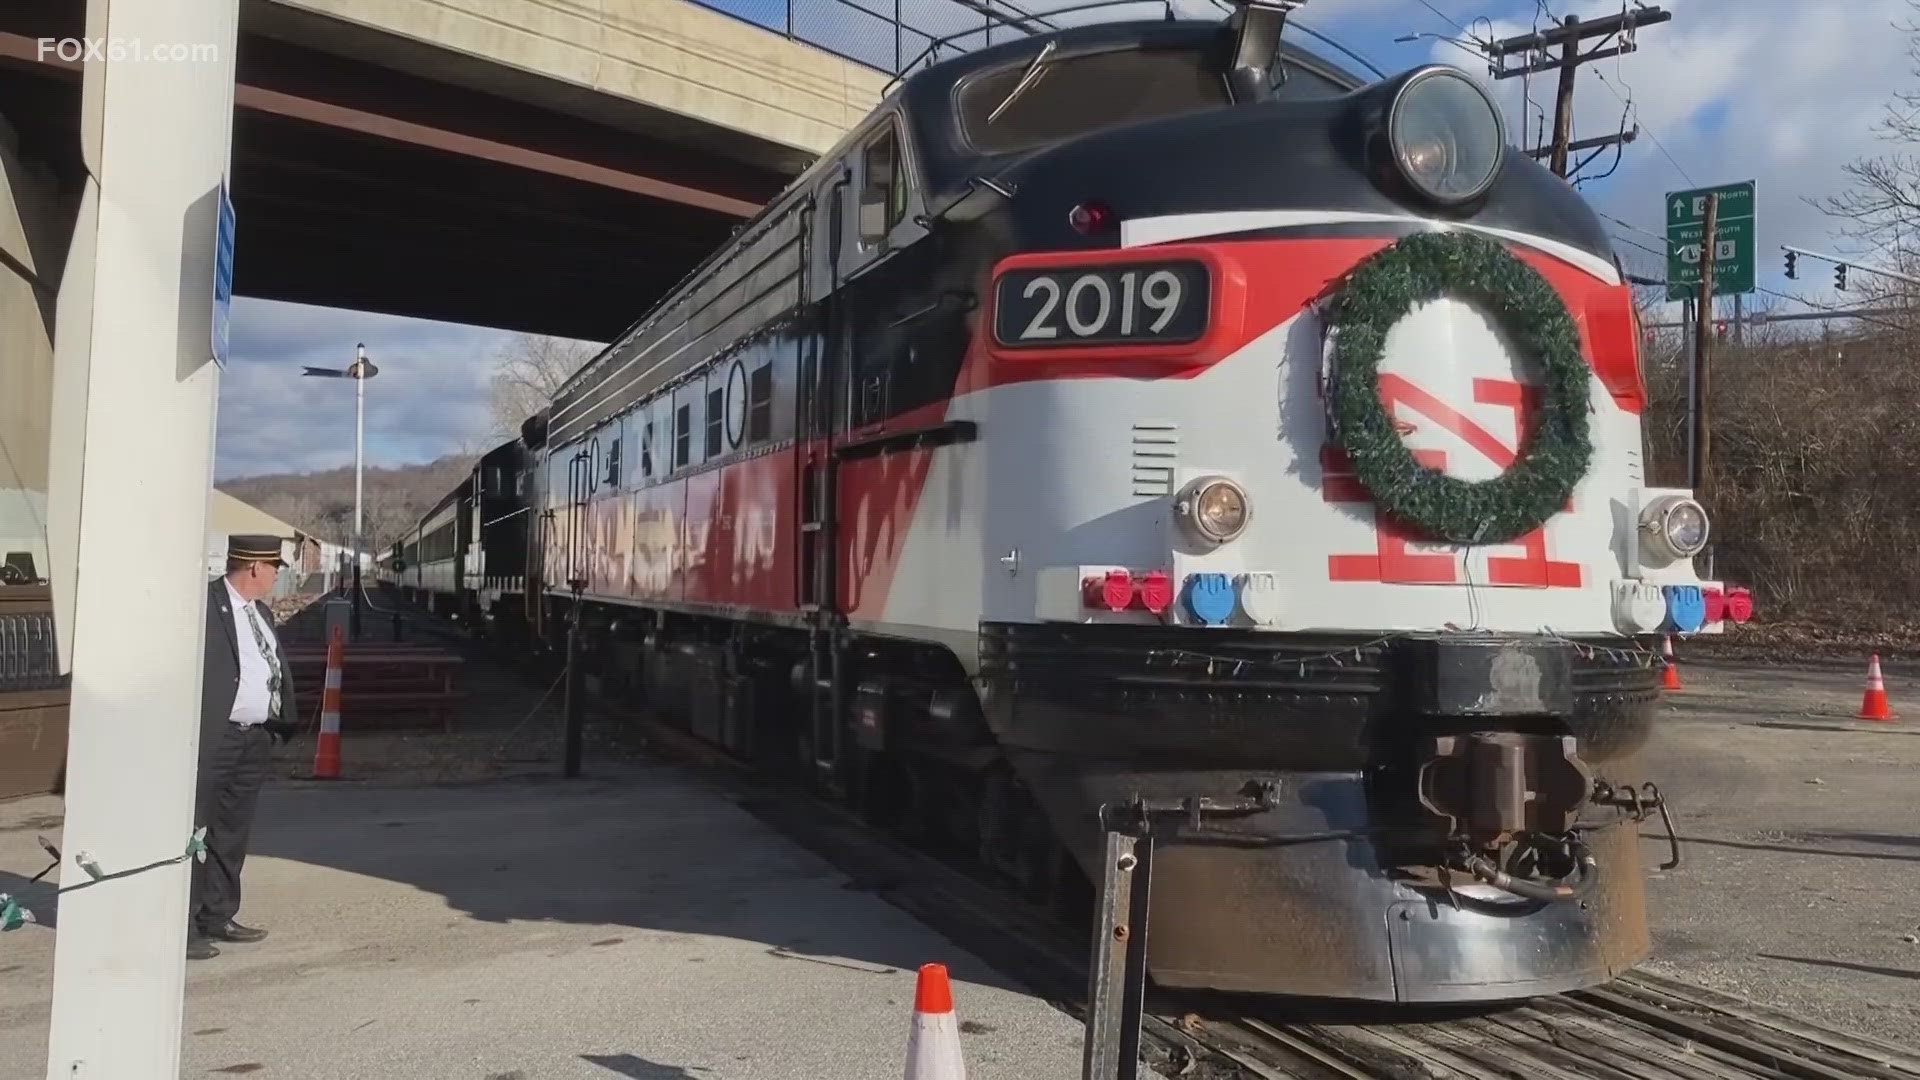 The Railroad Museum of New England continues its tradition of spreading holiday cheer on the tracks.